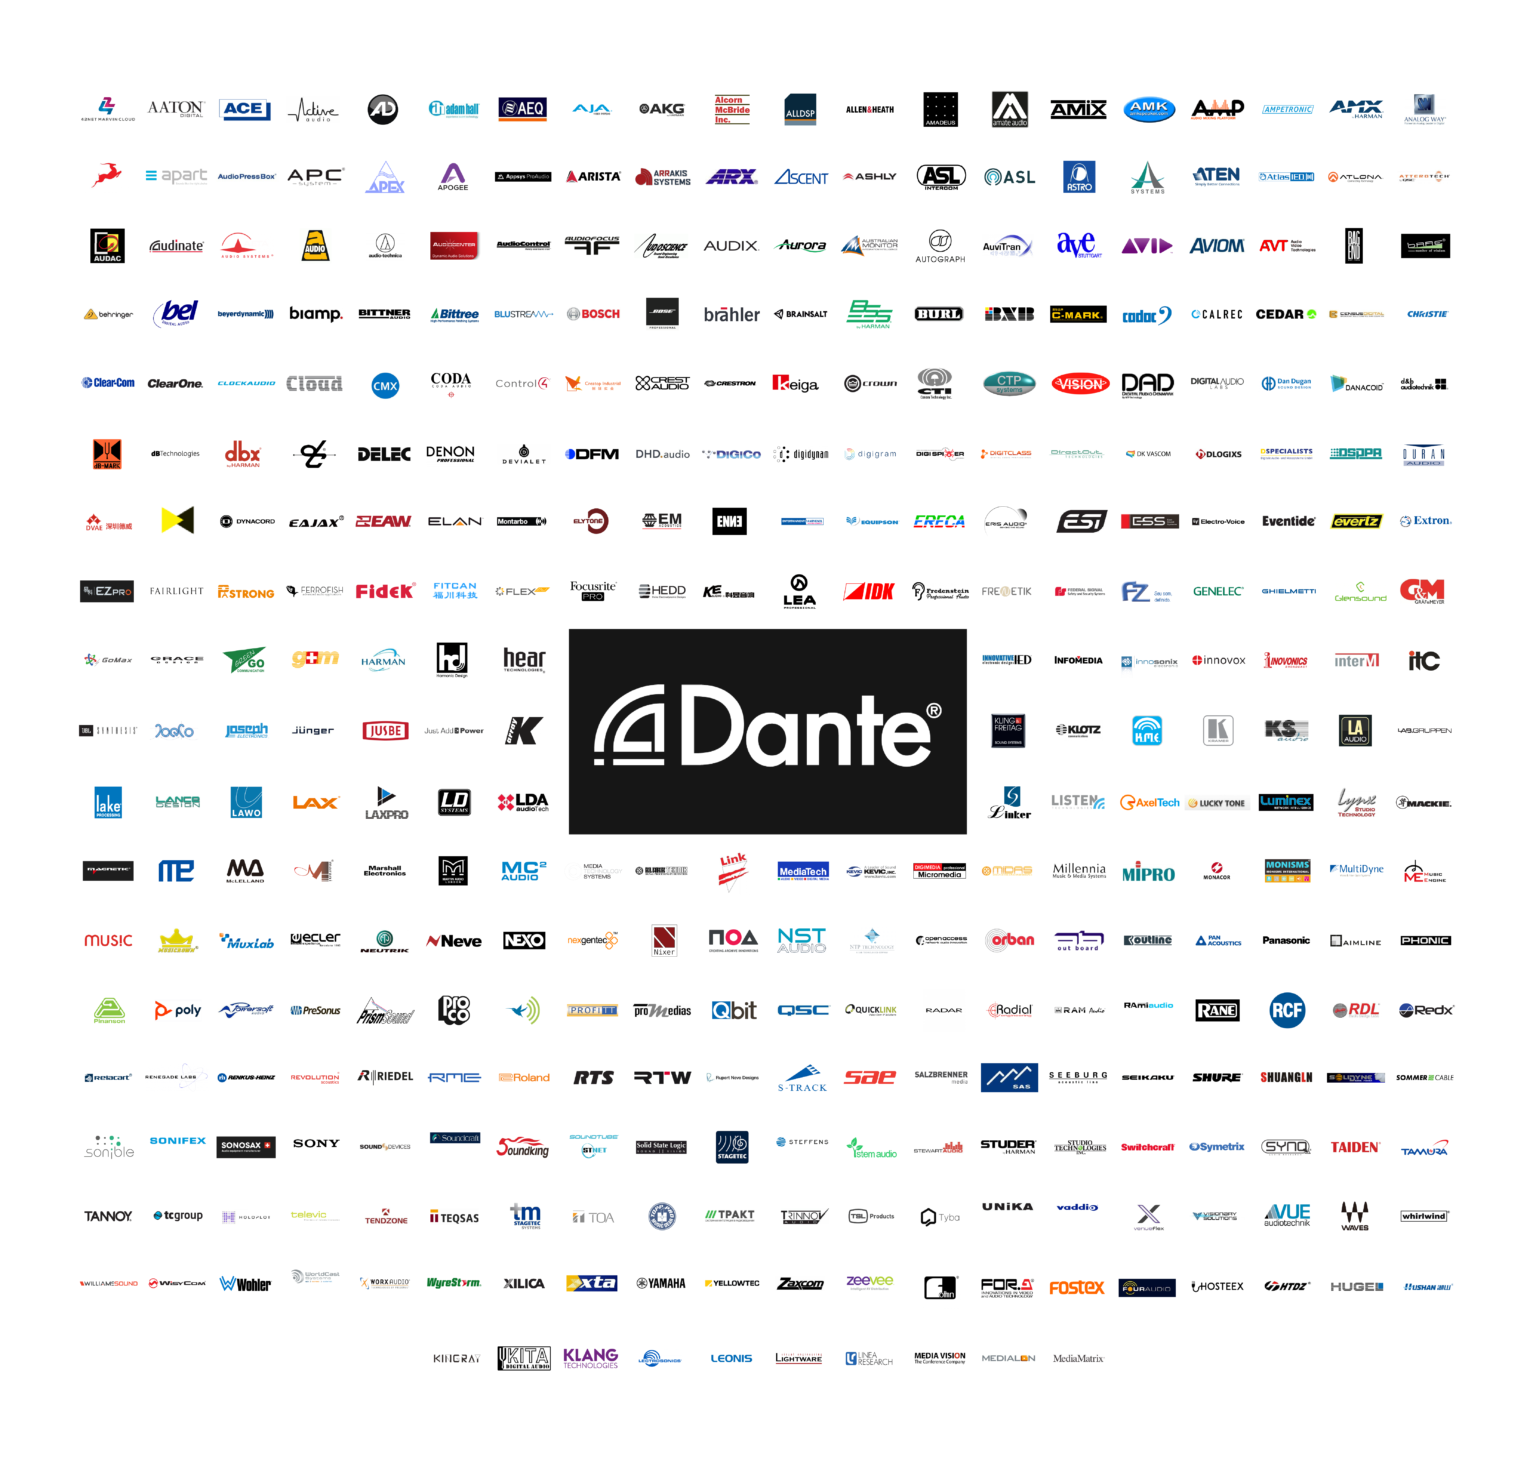 Dante Supported in More Than 3000 Devices